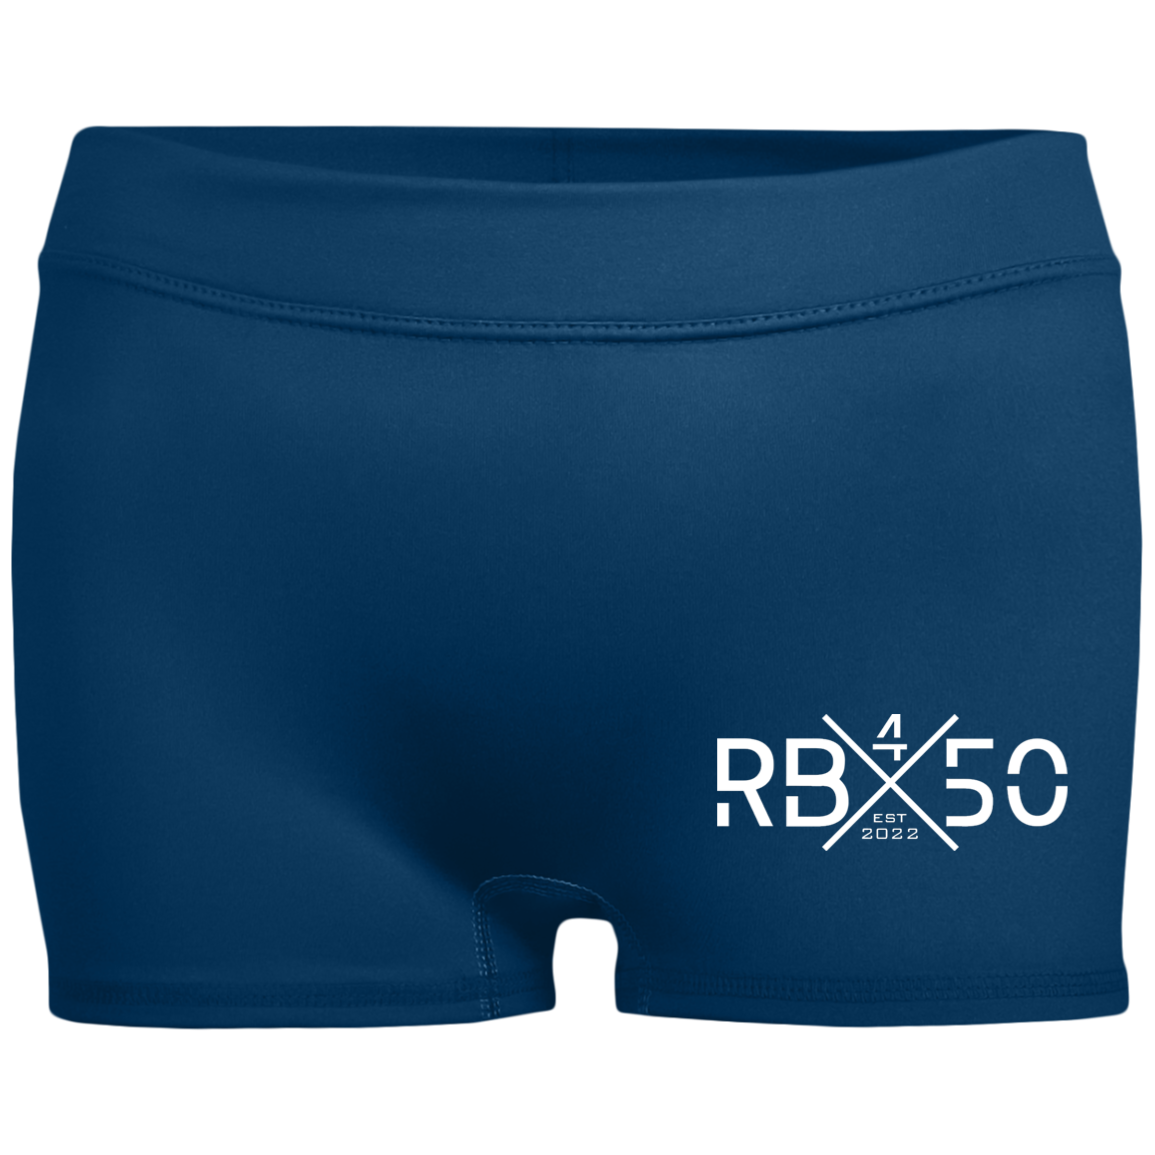 RB450 LOGO Ladies' Fitted Moisture-Wicking 2.5 inch Inseam Shorts